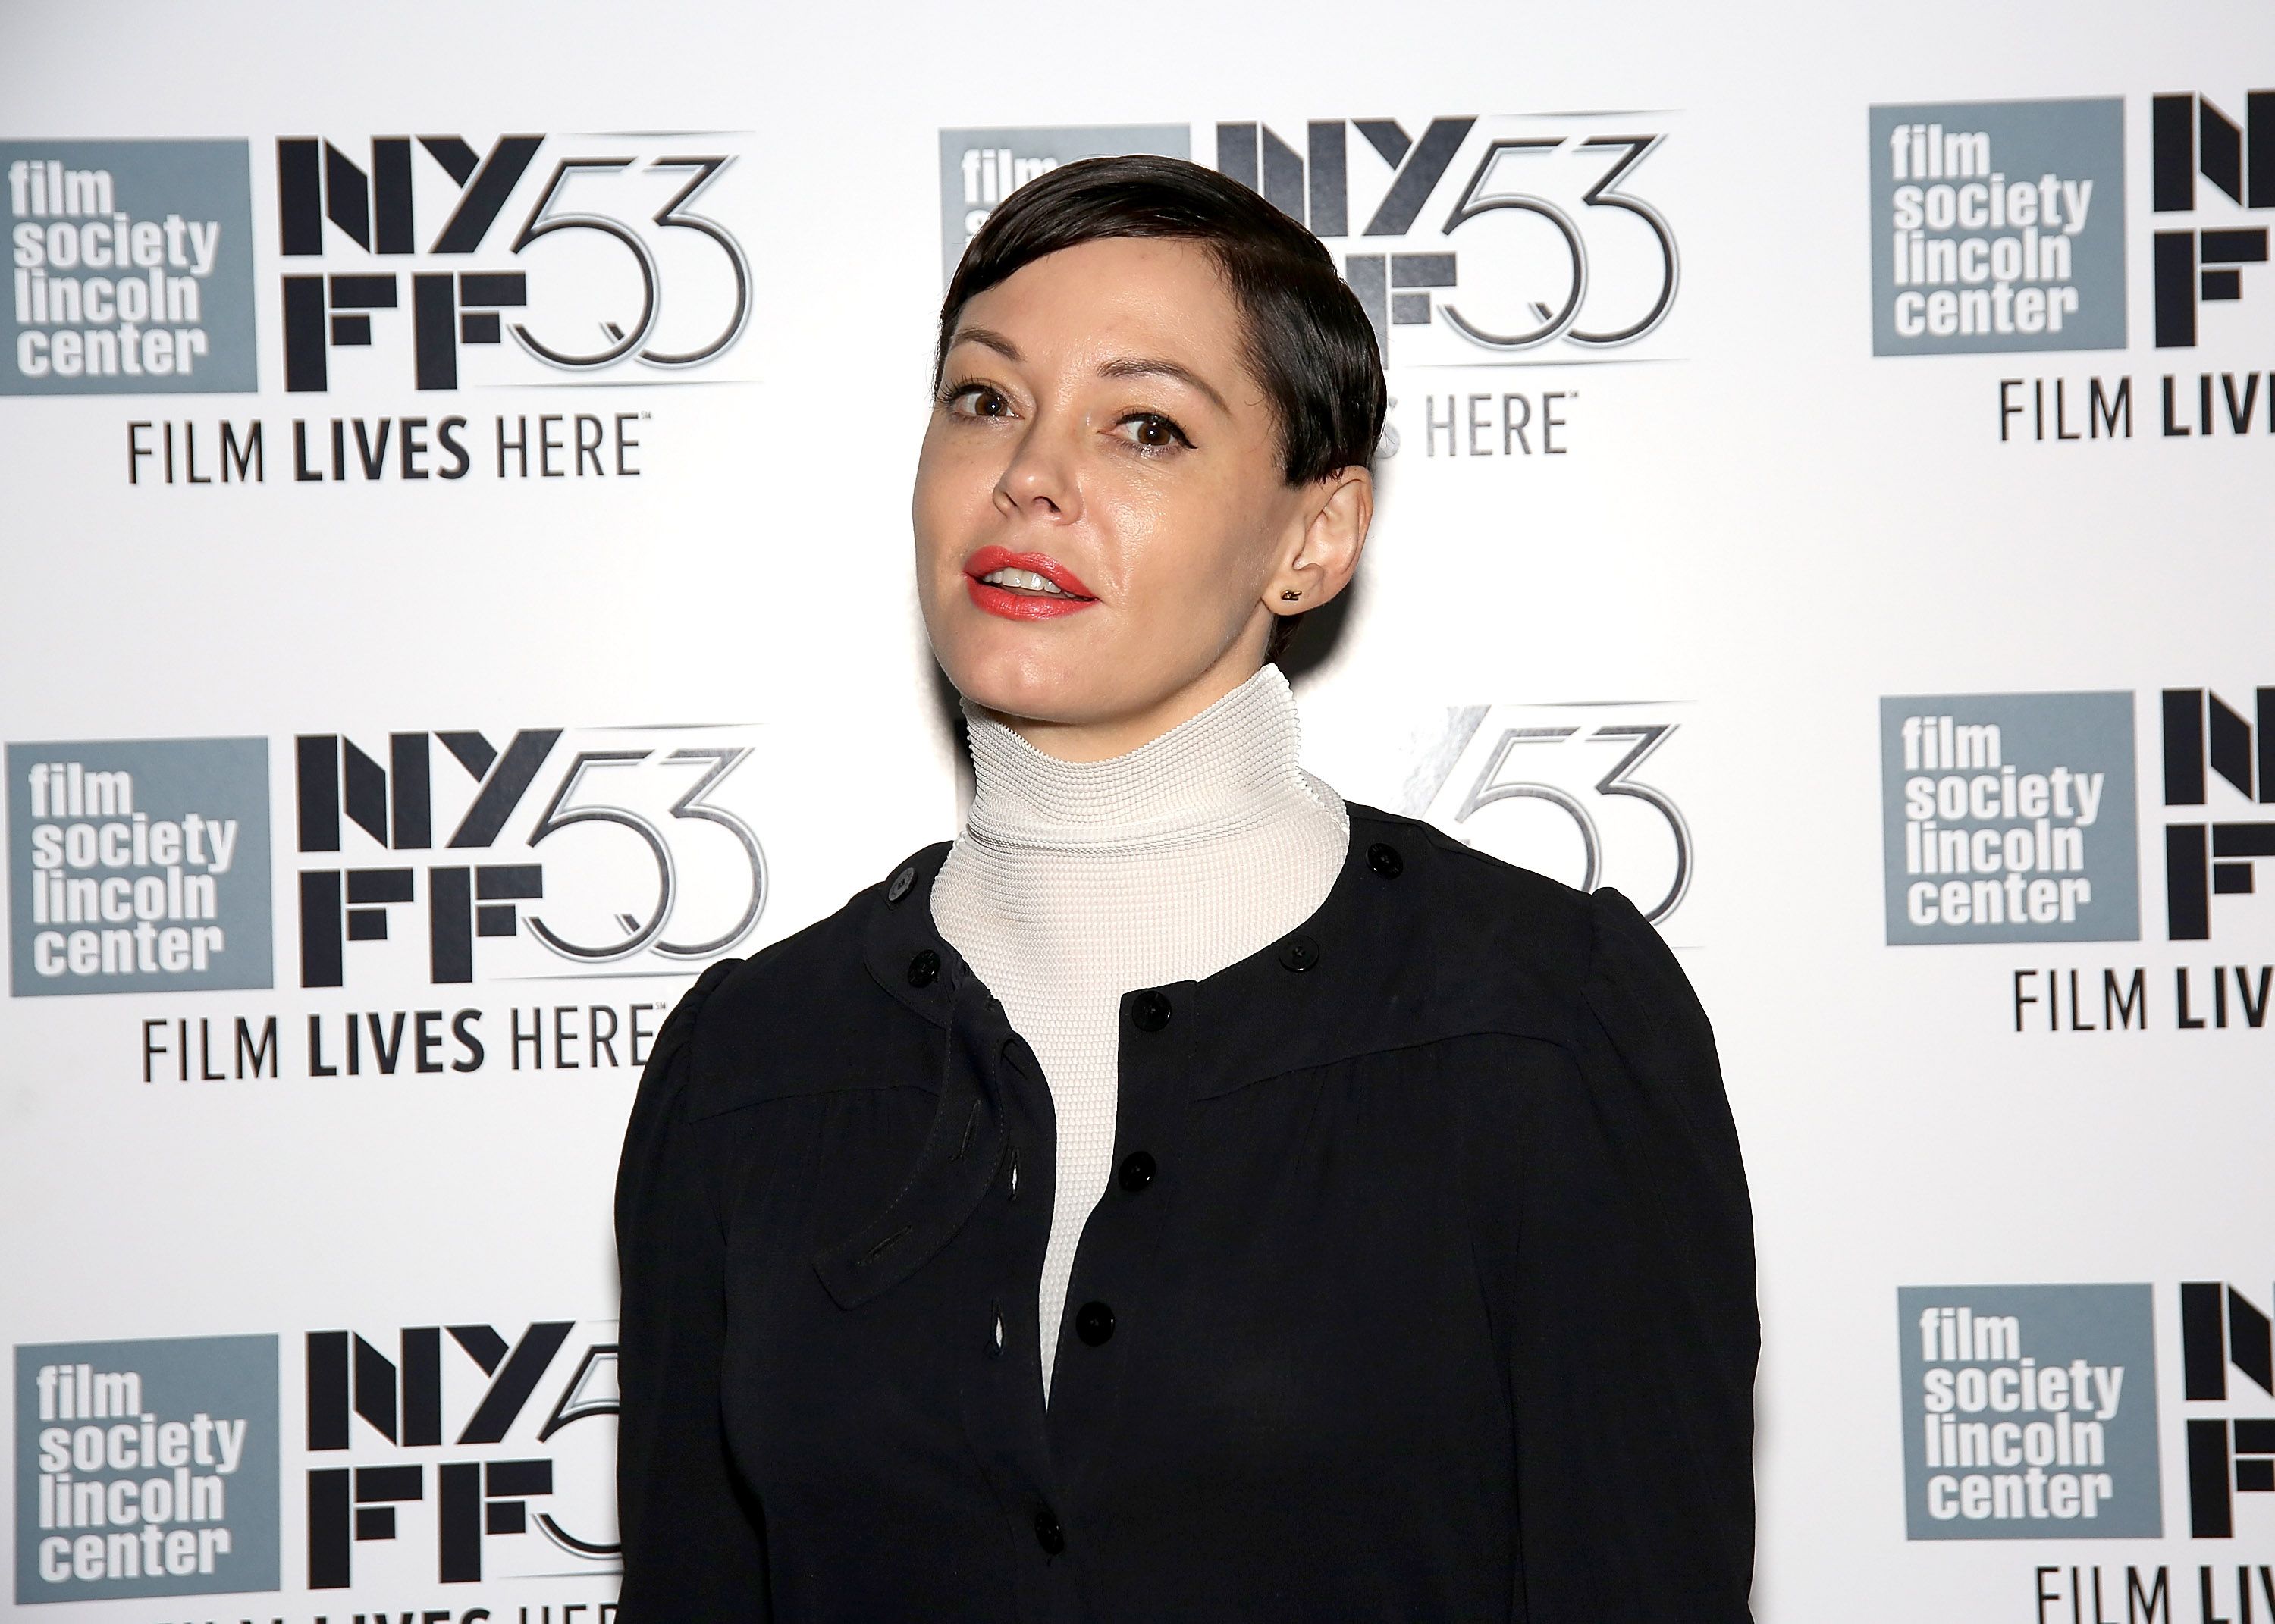 Rose McGowan at the 53rd New York Film Festival "NYFF Live" on October 4, 2015, in New York City | Photo: Paul Zimmerman/Getty Images